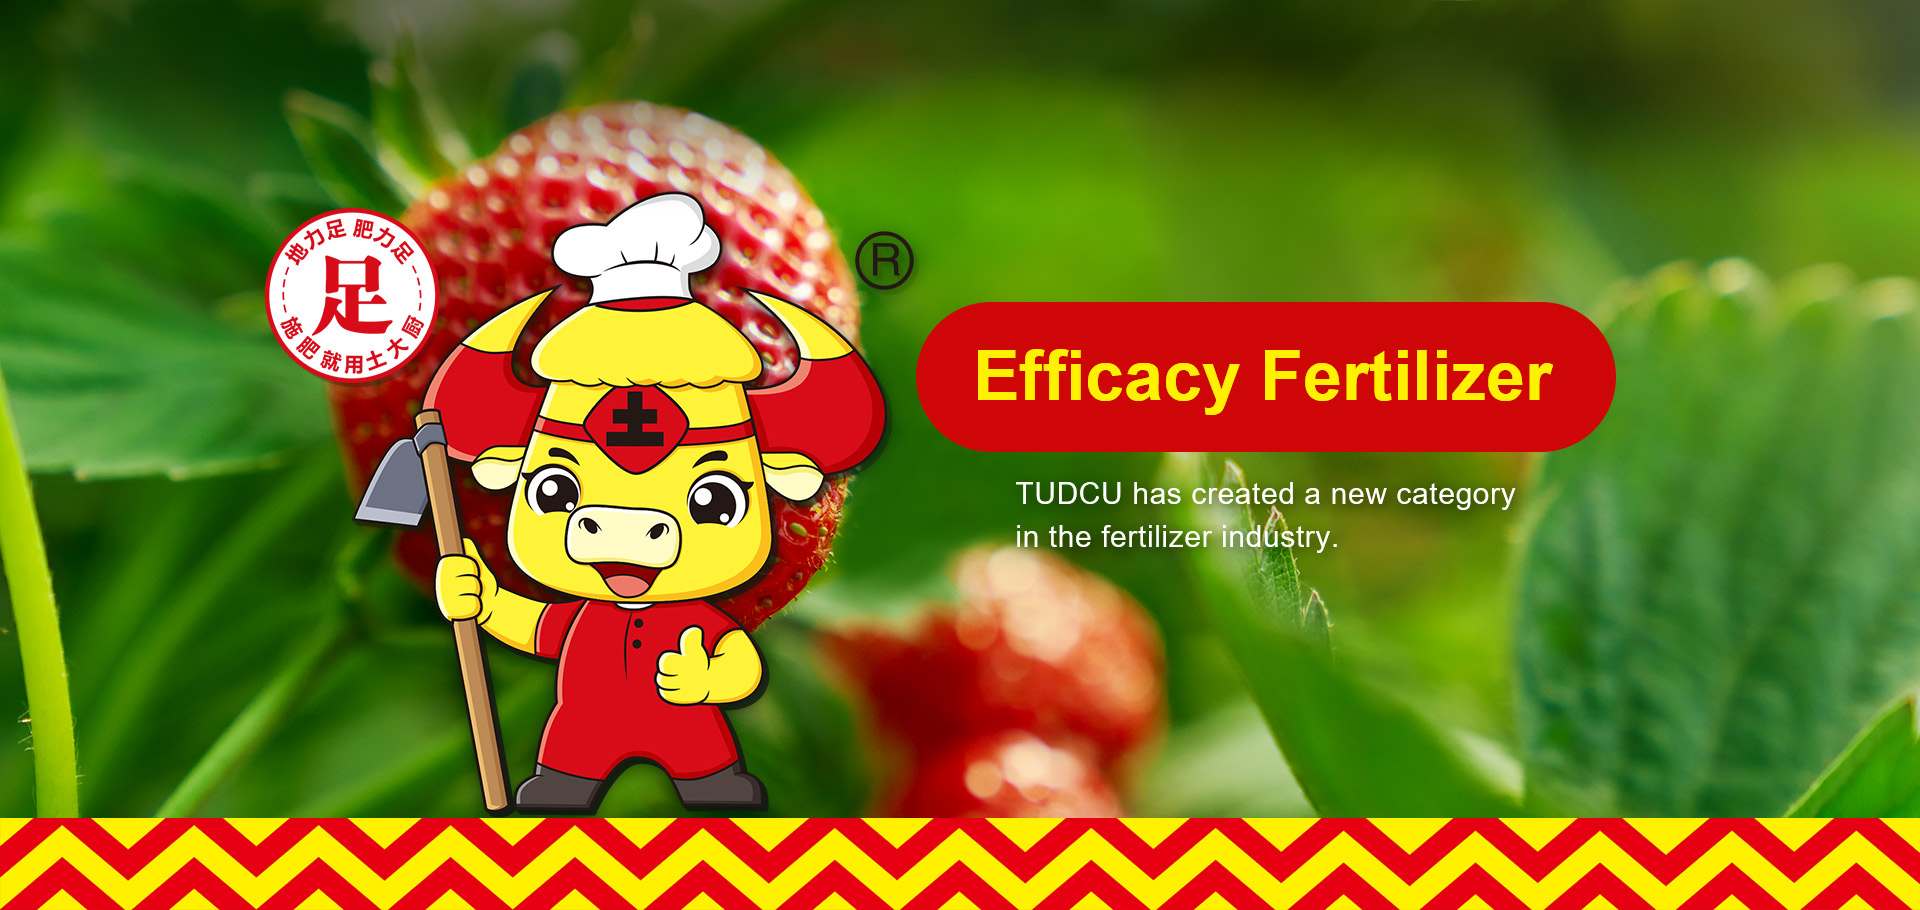 TUDCU has created a new category in the fertilizer industry